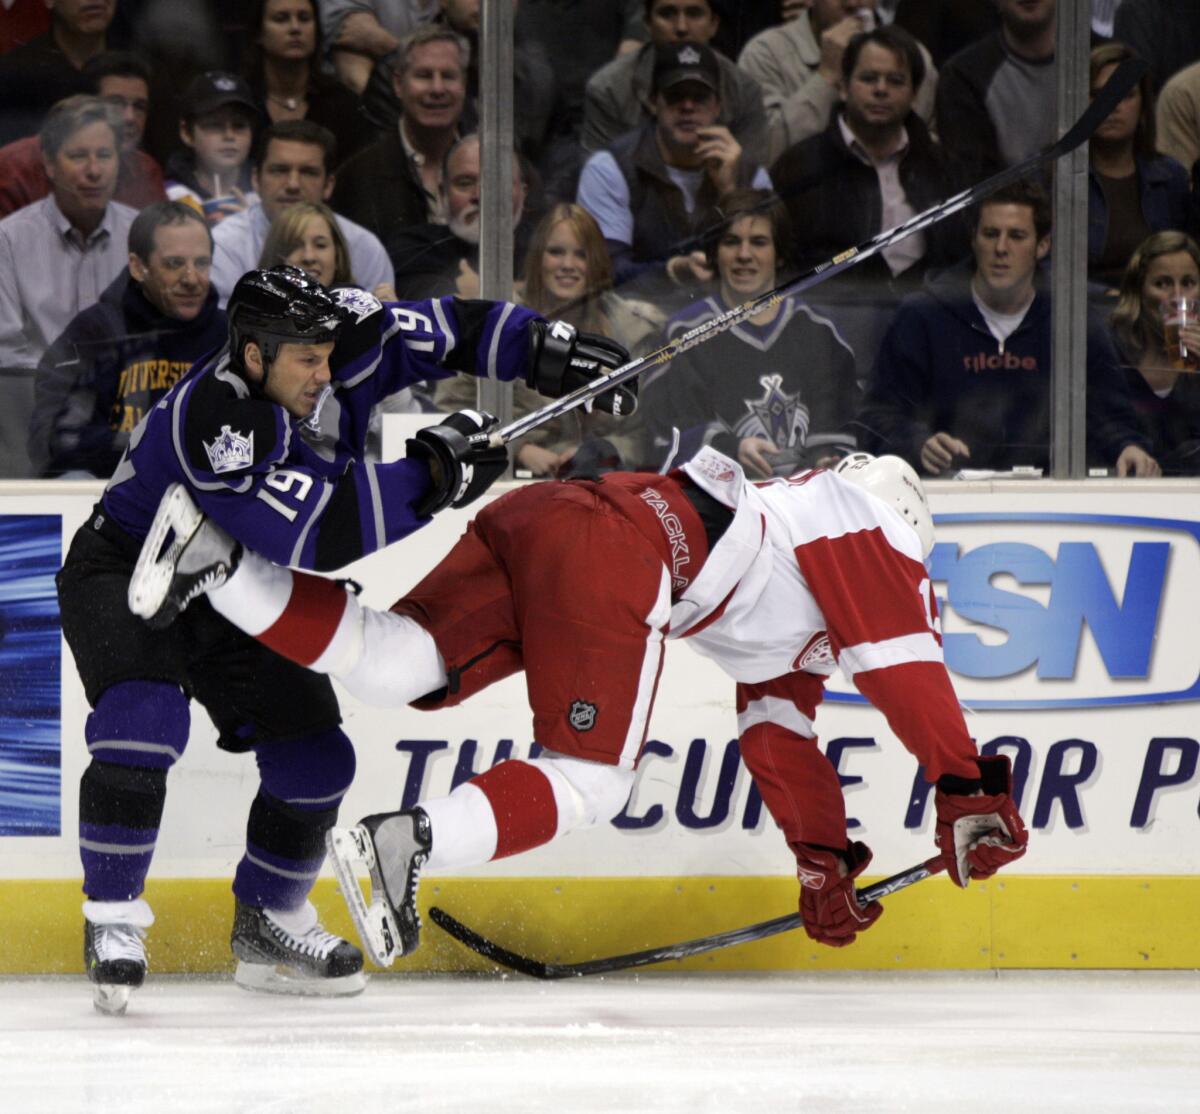 The Kings' Sean Avery checks Detroit's Pavel Datsyuk back in 2005. Avery made plenty of headlines. His post-game rants became productive moments ... for writers.